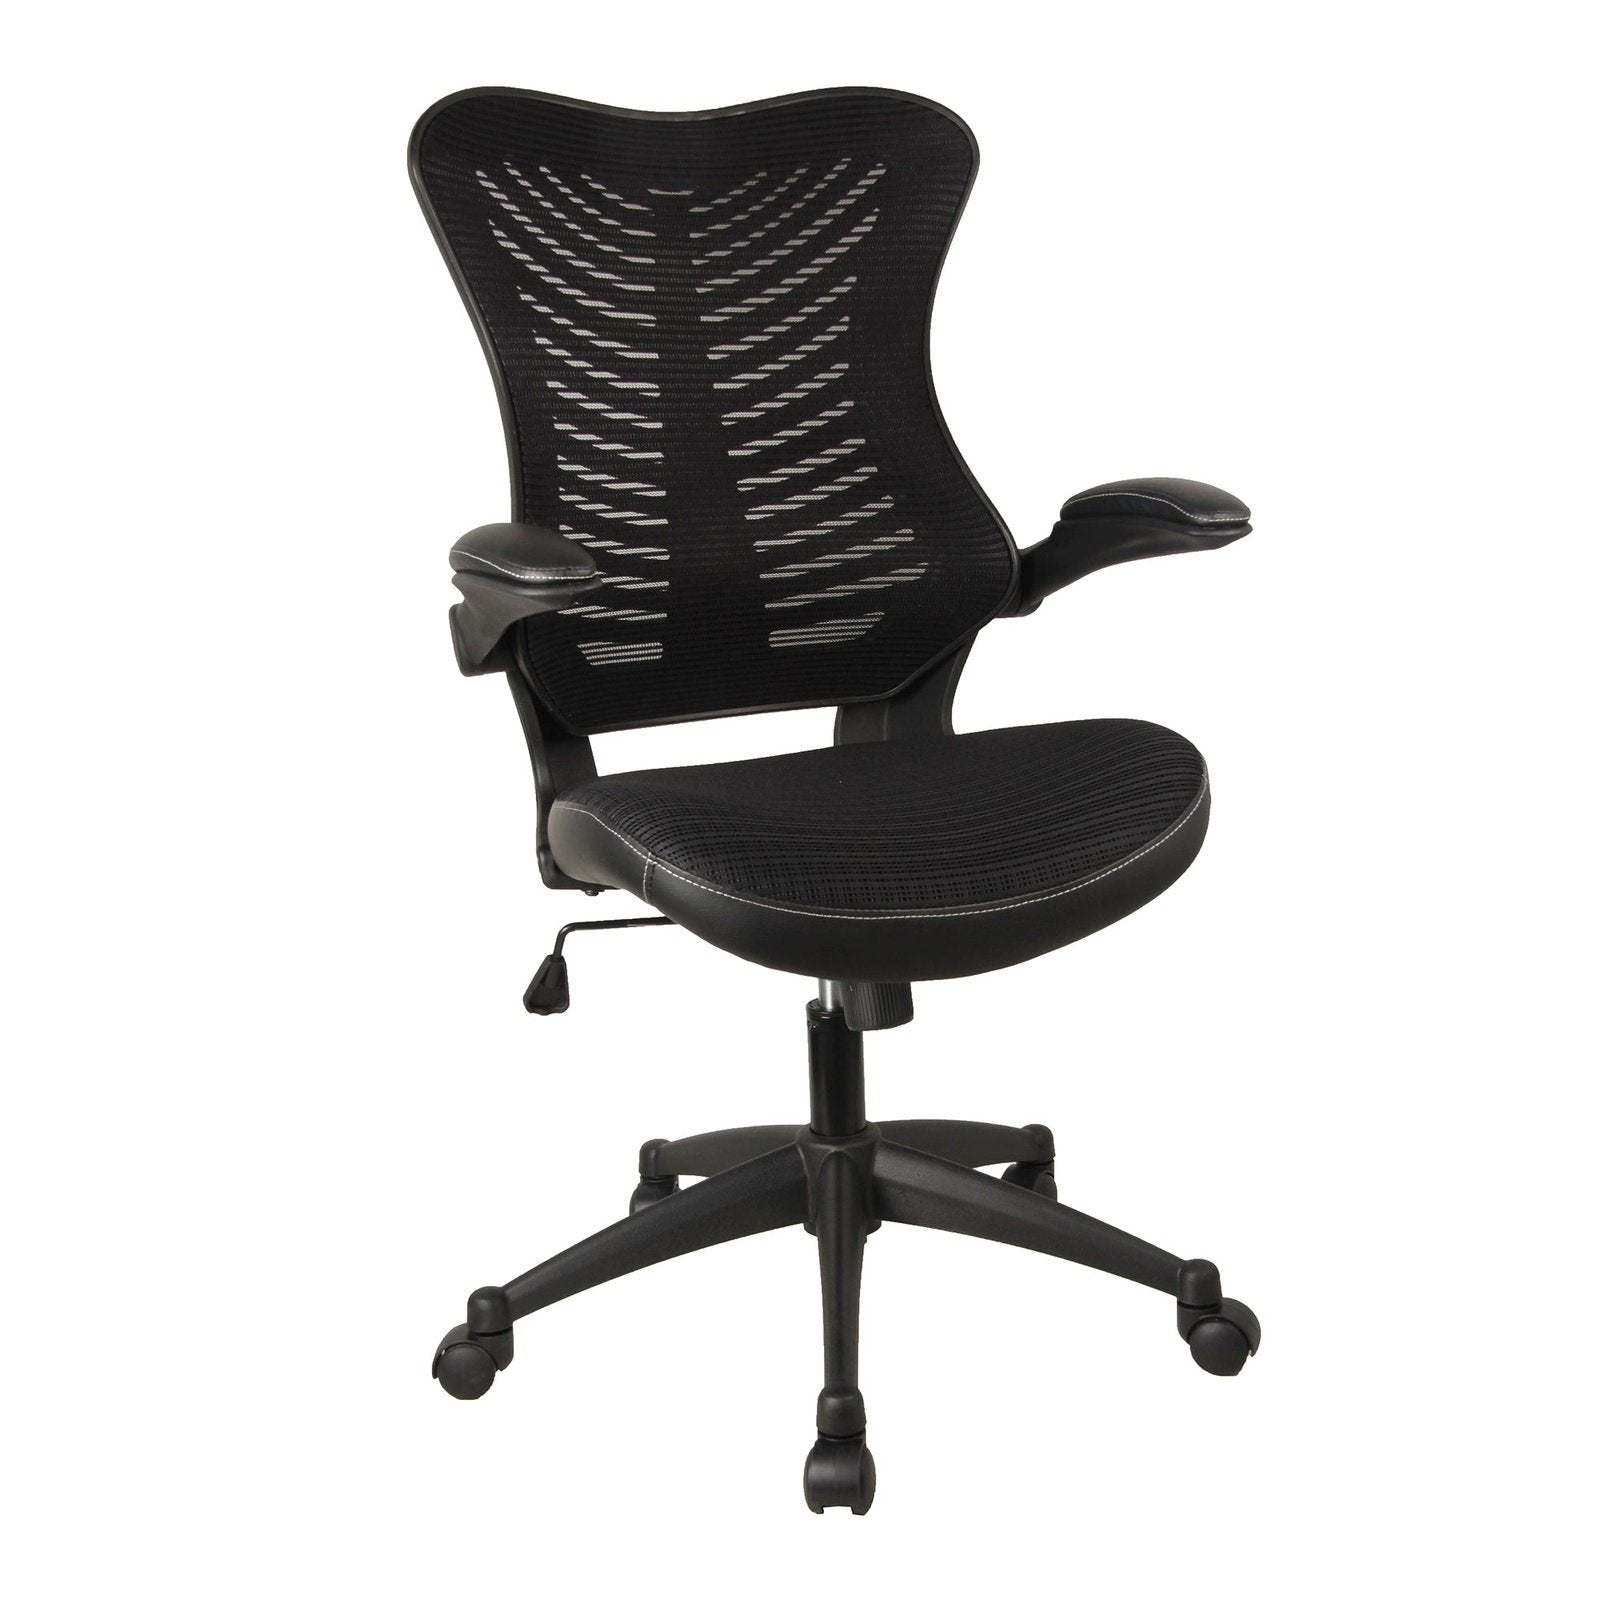 Executive Medium Back Mesh Chair with AIRFLOW Fabric on the Seat - Office Products Online